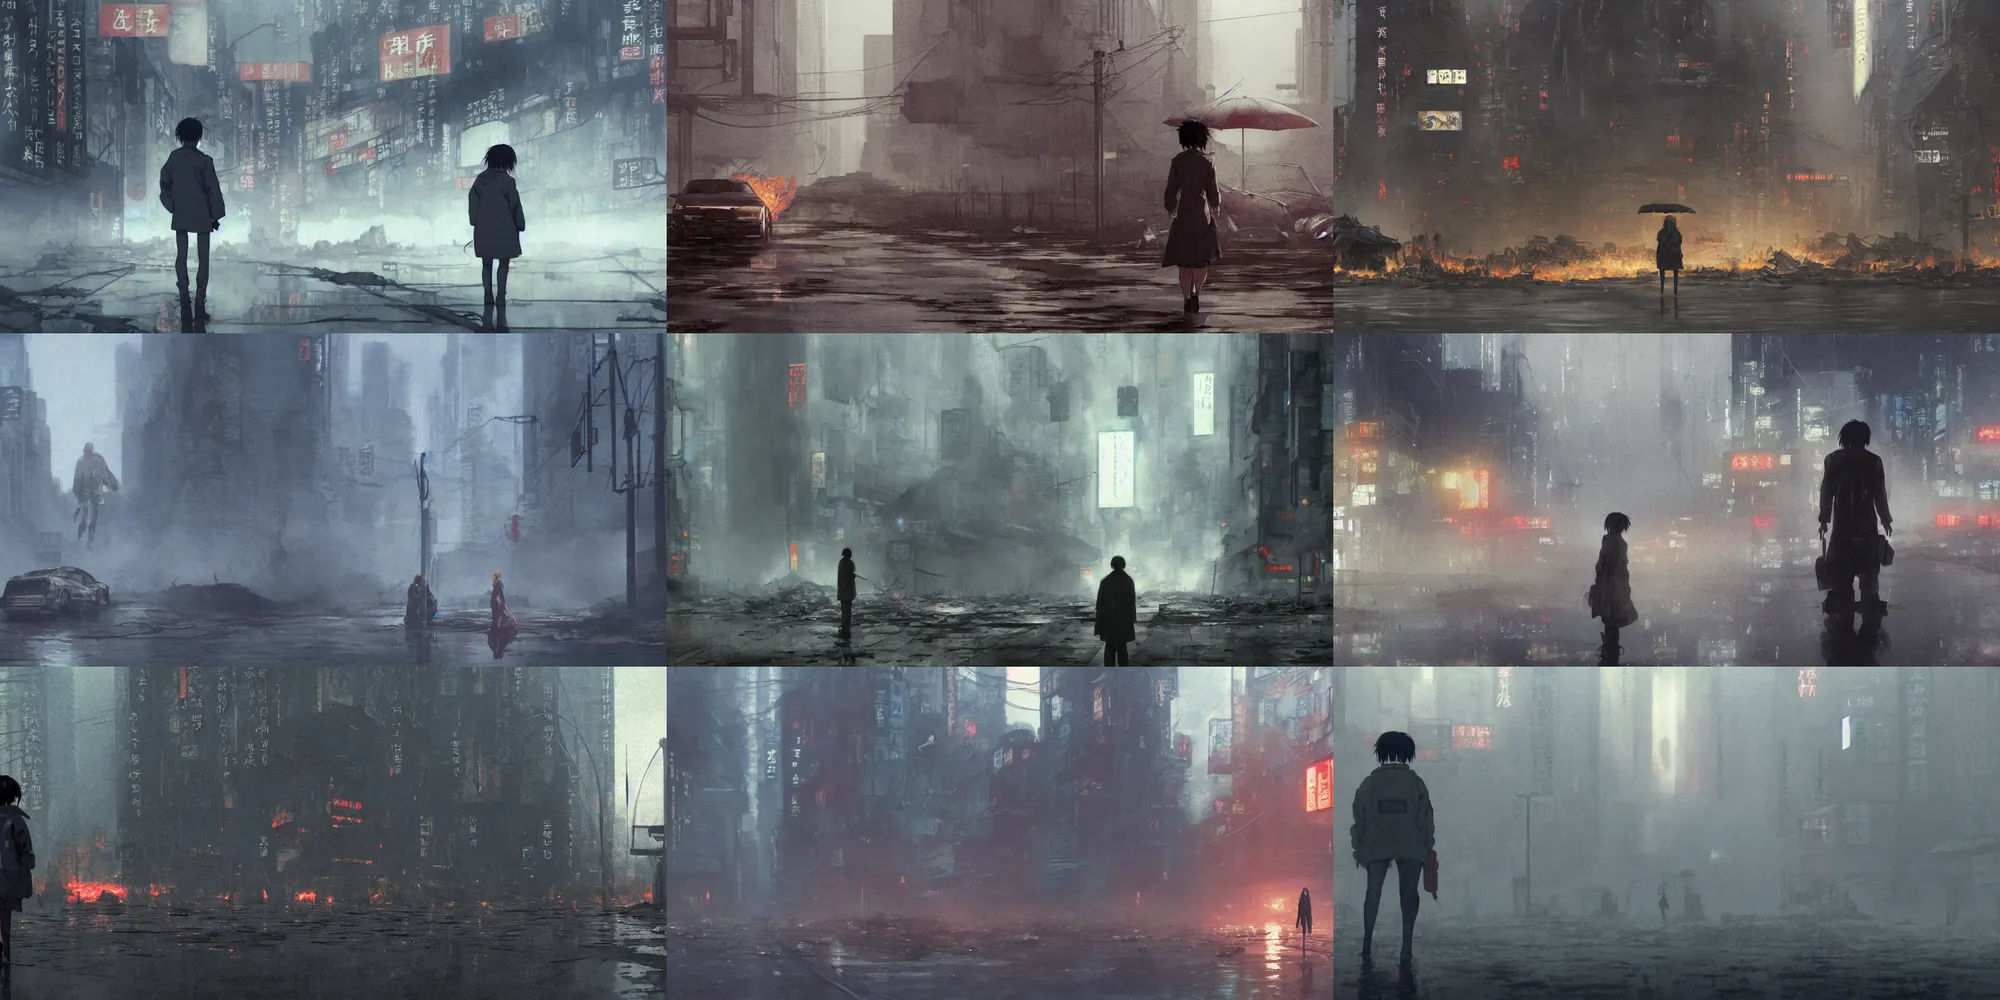 Prompt: incredible wide screenshot, ultrawide, simple water color, paper texture, katsuhiro otomo ghost in the shell, mamoru oshii, titled camera angle, backlit girl in parka, wet dark road, parasol in deserted junk pile giant robot, earthquake destruction, reflection, thick fog, smoke, destroyed robots, blazing fire, burning bus crash inferno, lens flare